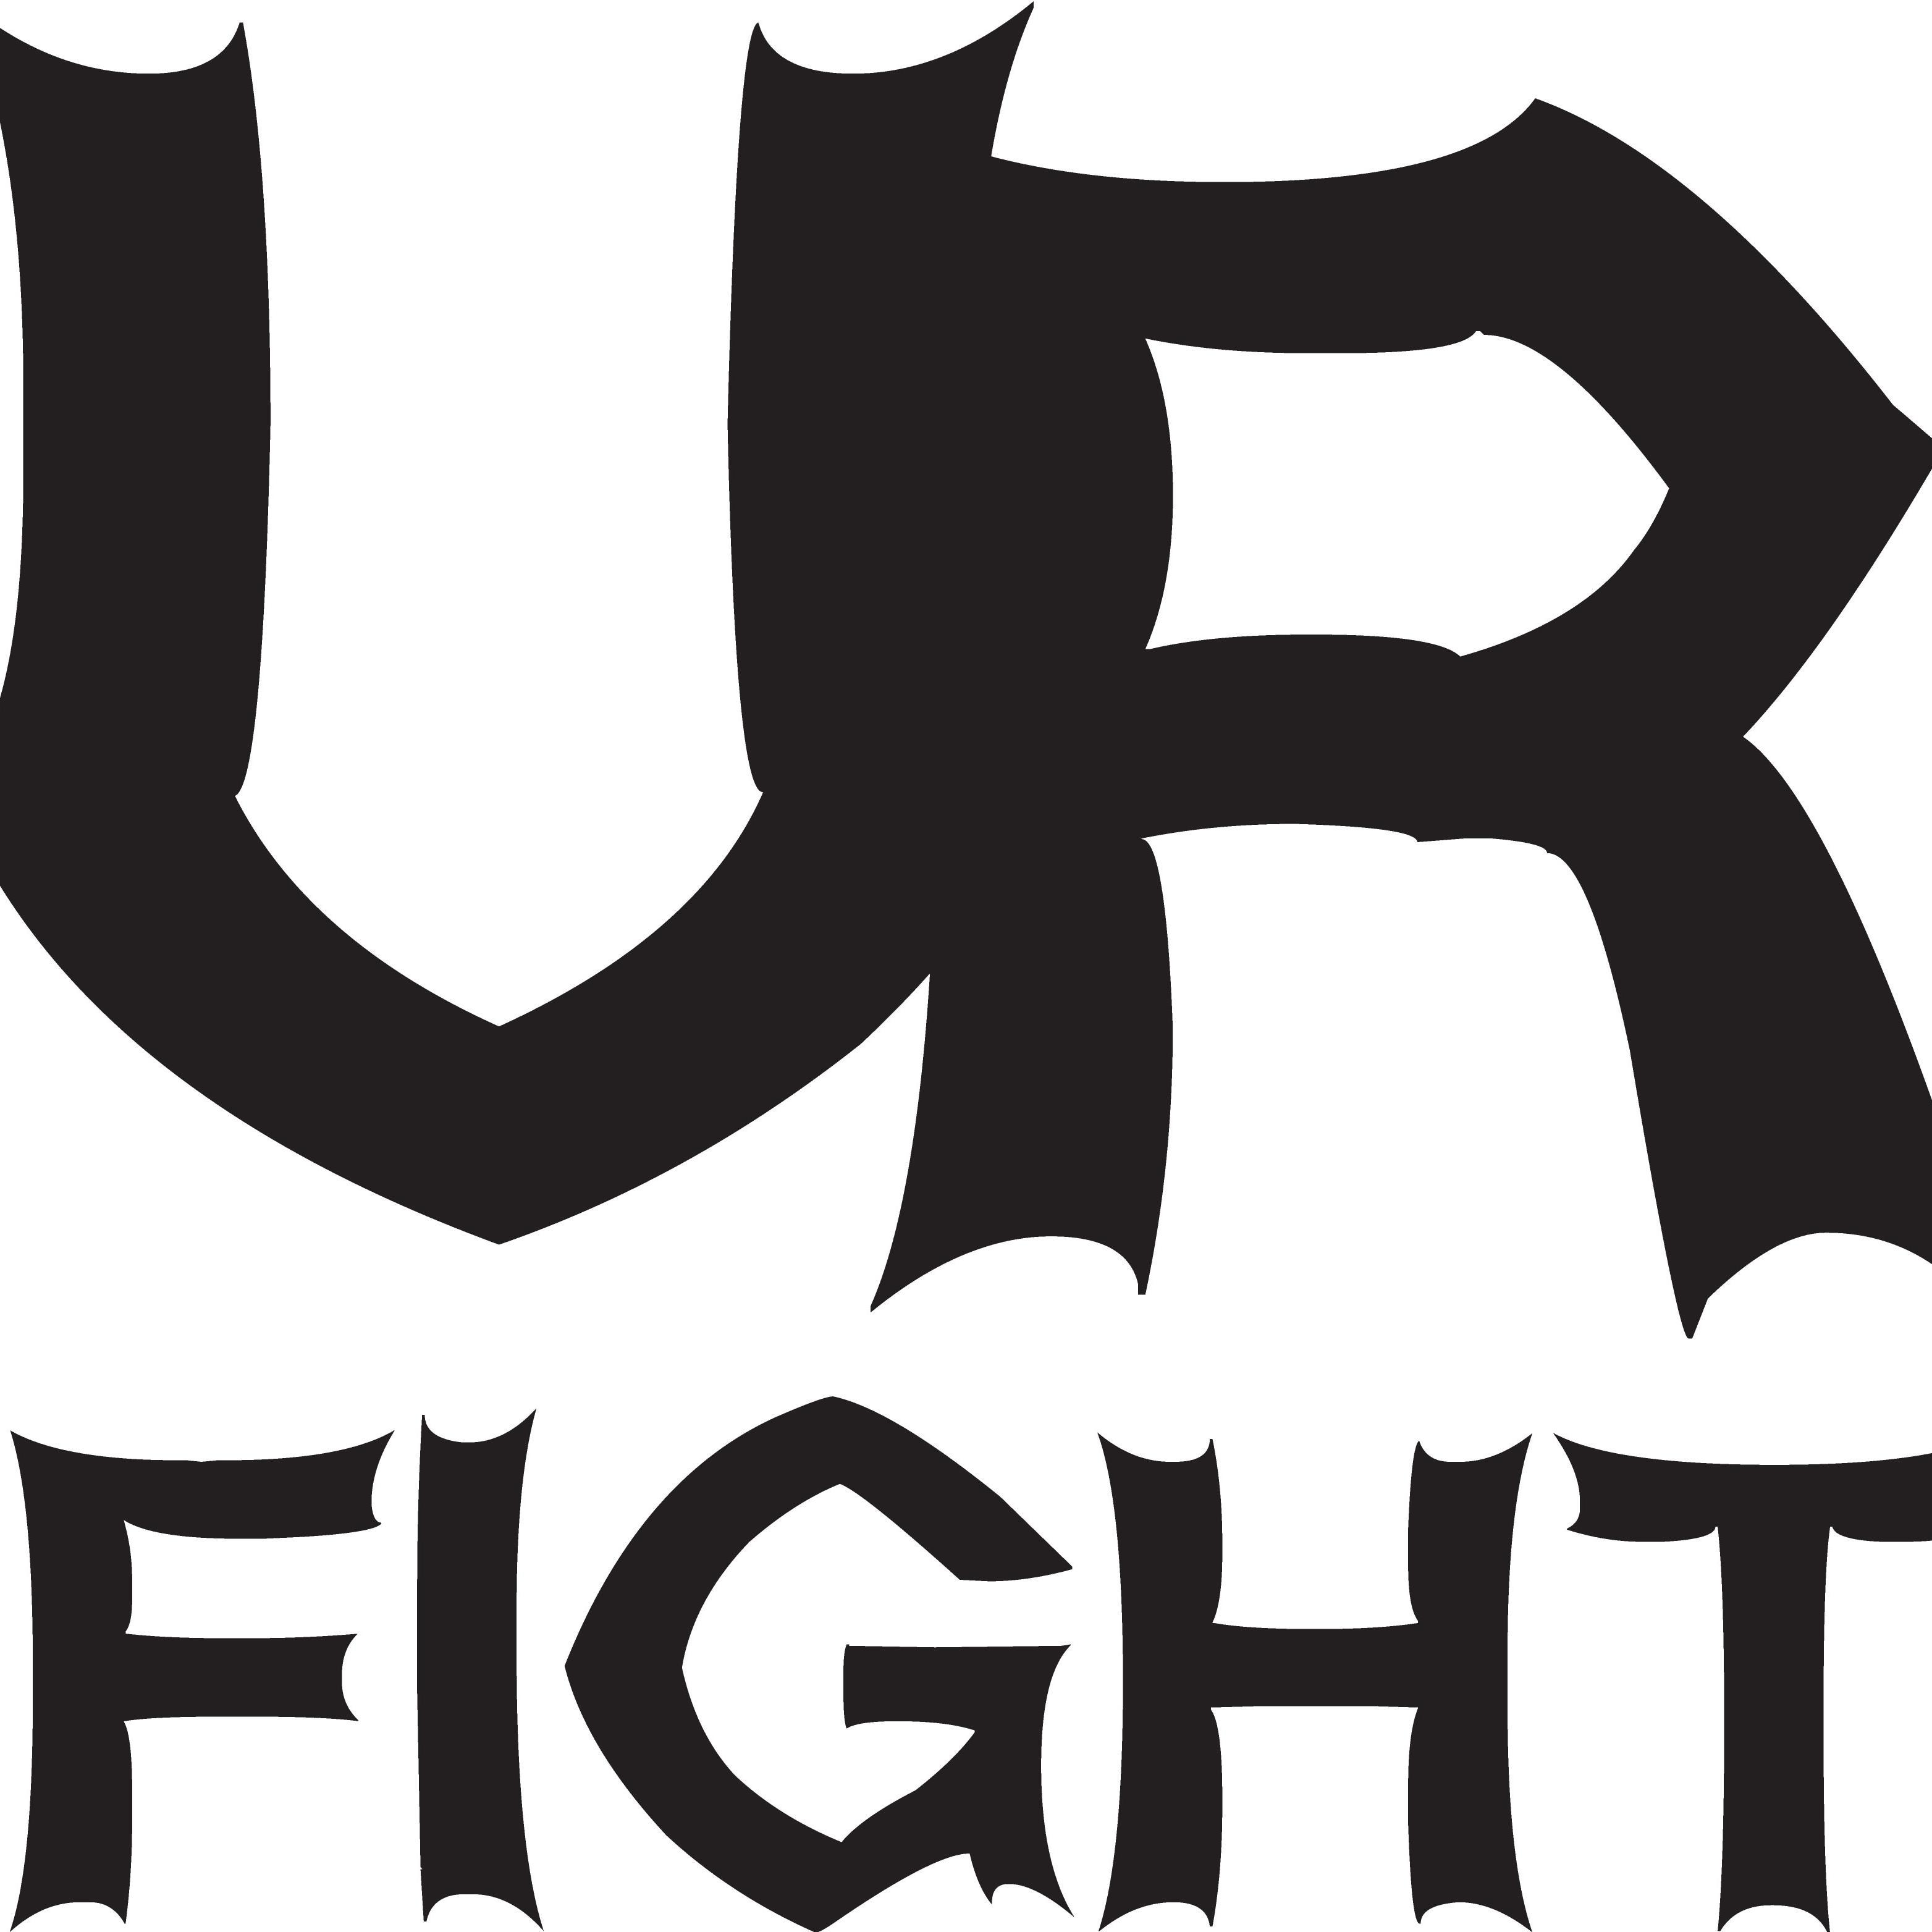 #MMA apparel & marketing brand. We are here to promote fighters, gyms, promotors & all of #LocalMMA. GET NOTICED w/ #UrFight!